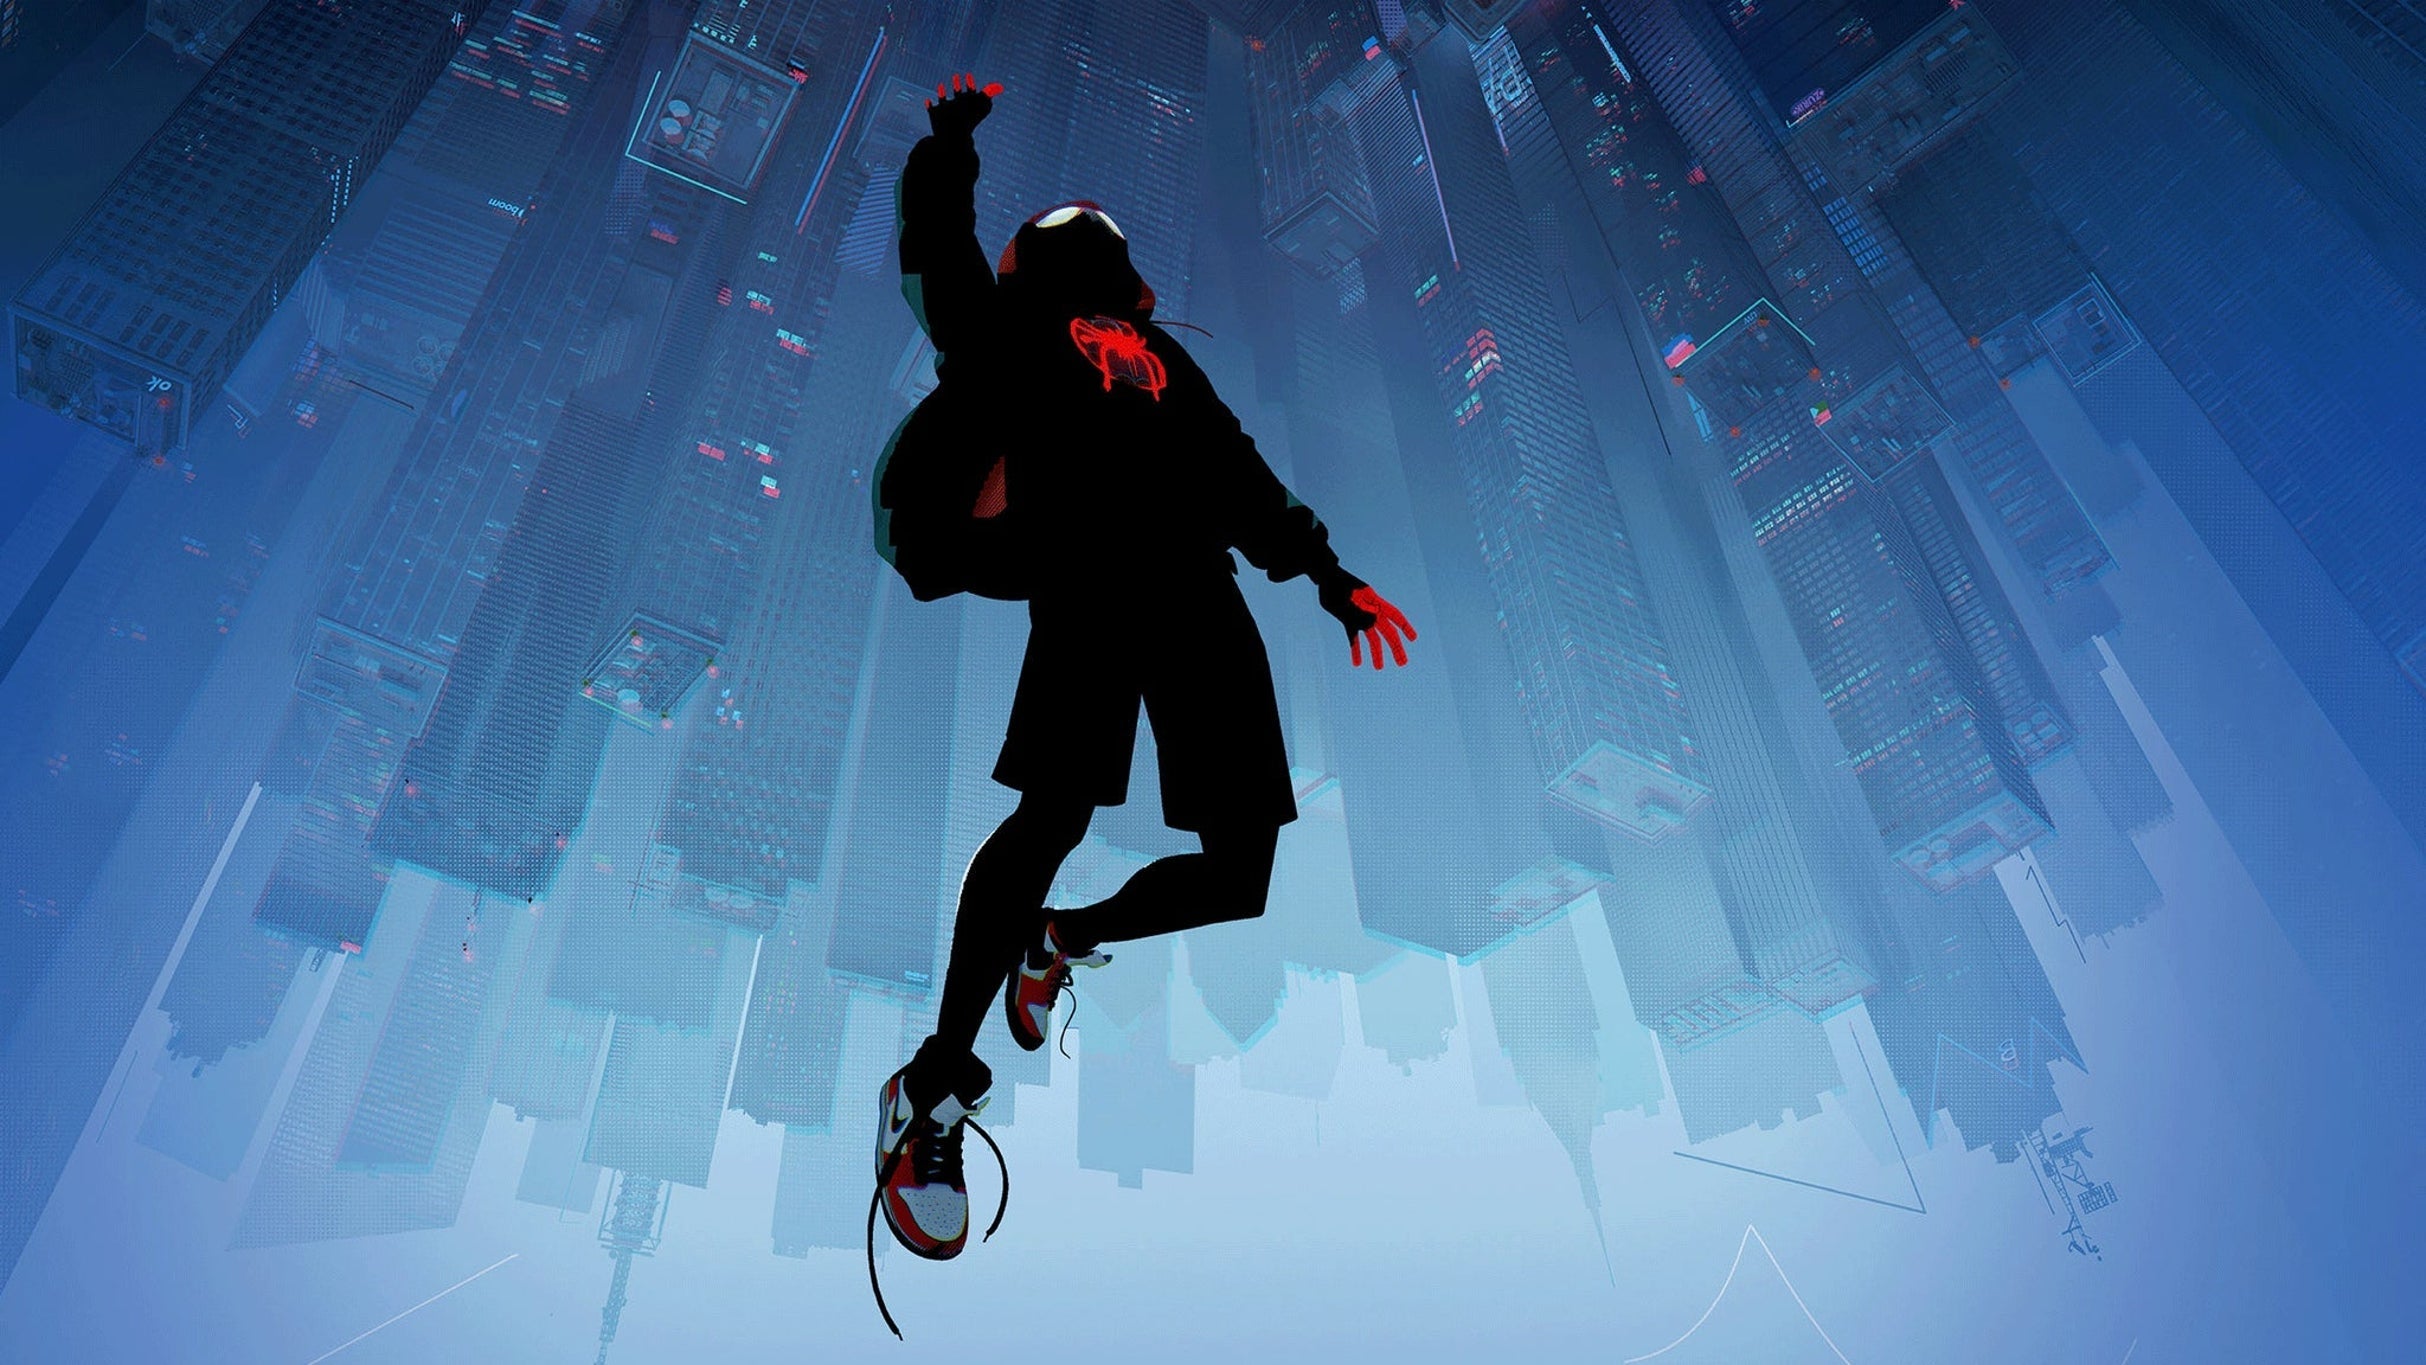 Spider-Man: Into the Spider-Verse In Concert in London promo photo for Ticketmaster presale offer code